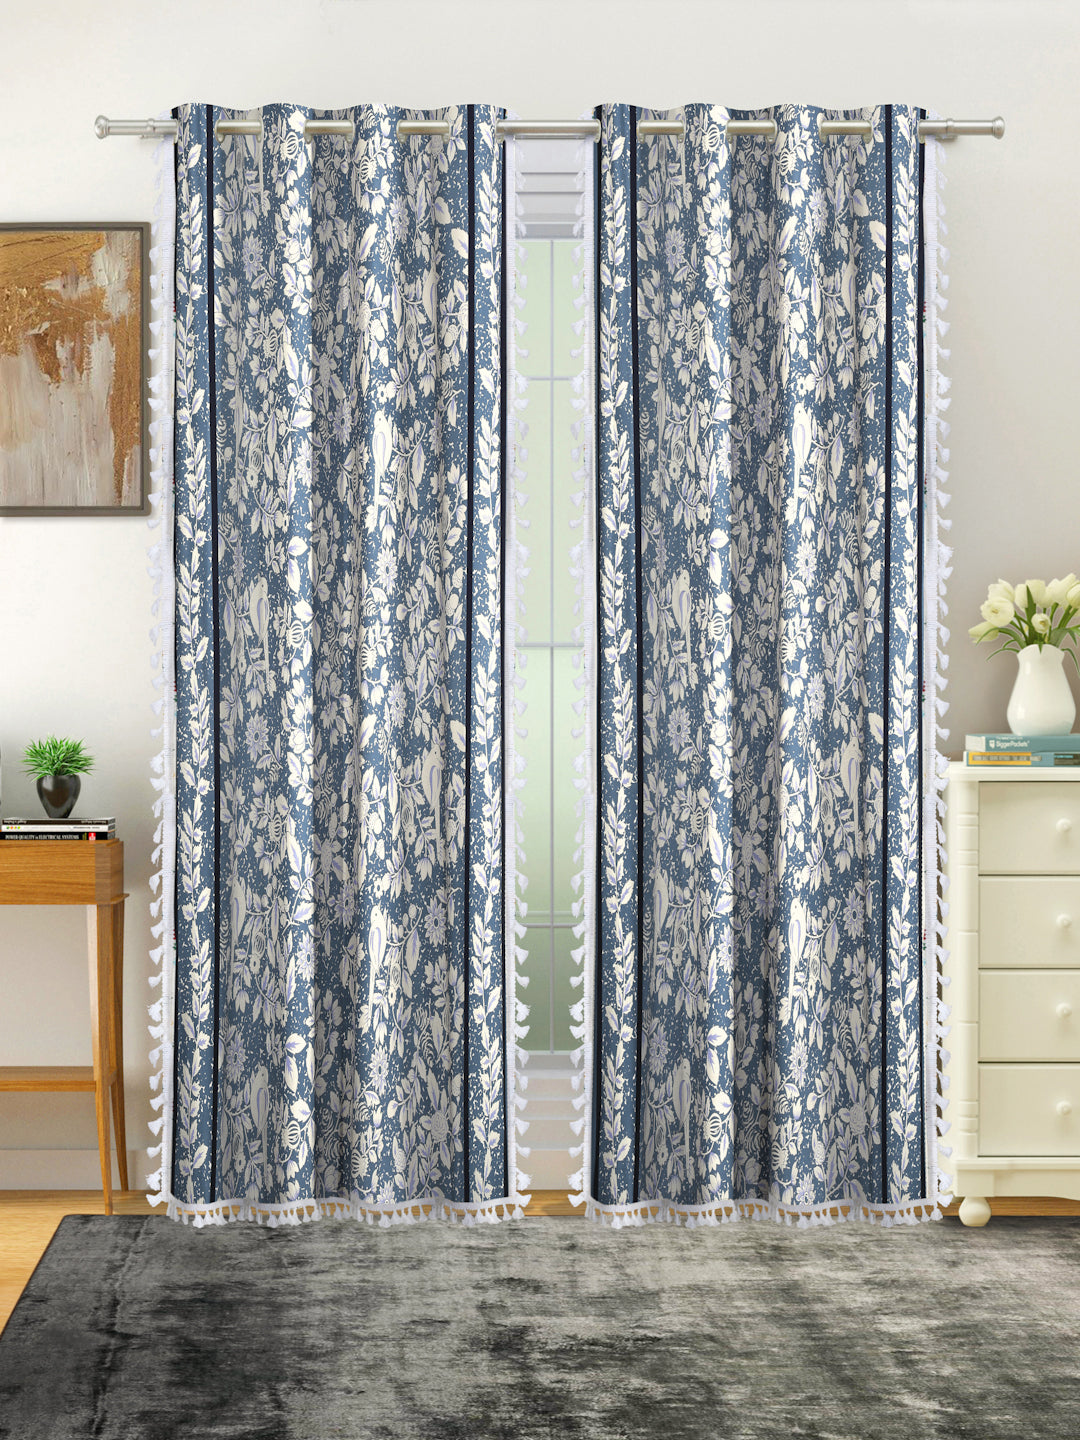 Cotton Printed Boho Light Filtering Door Curtain with Lace- Navy Blue (Pack of 2)